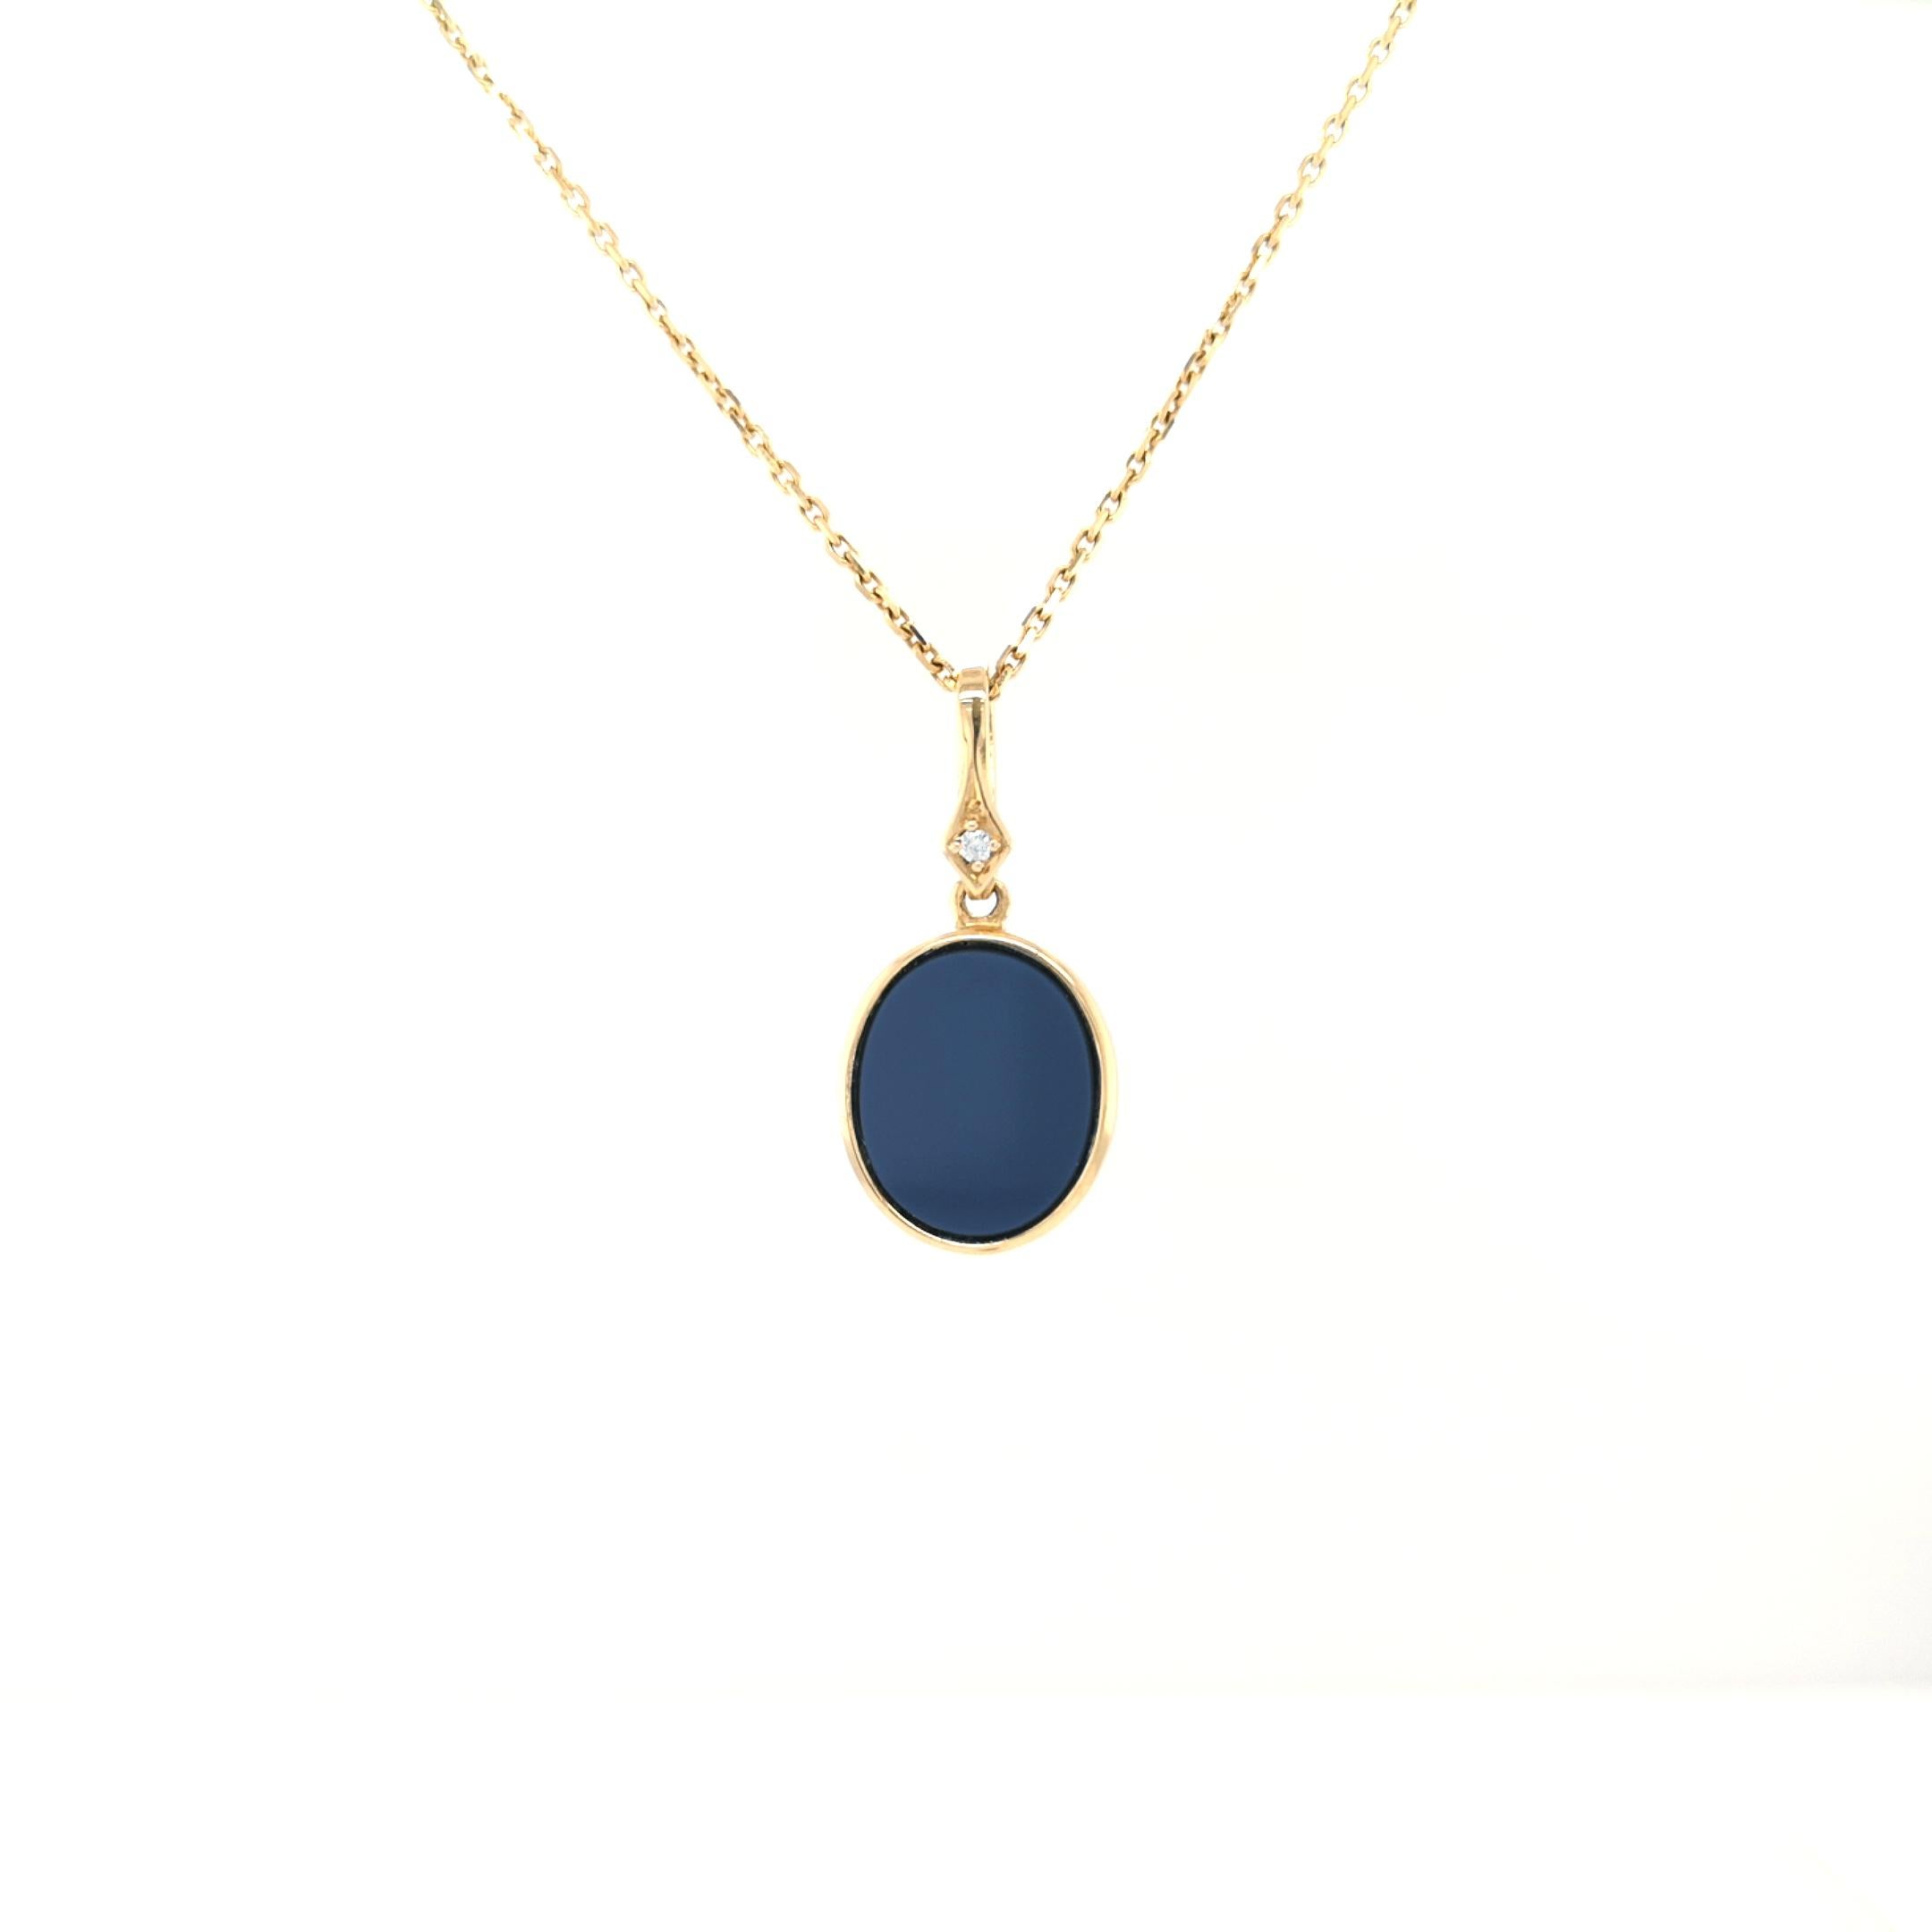 Victor Mayer oval pendant 18k yellow gold, Darcy & Elizabeth collection, 1 diamond, total 0.02 ct G VS brilliant cut, blue layered onyx

About the creator Victor Mayer
Victor Mayer is internationally renowned for elegant timeless designs and